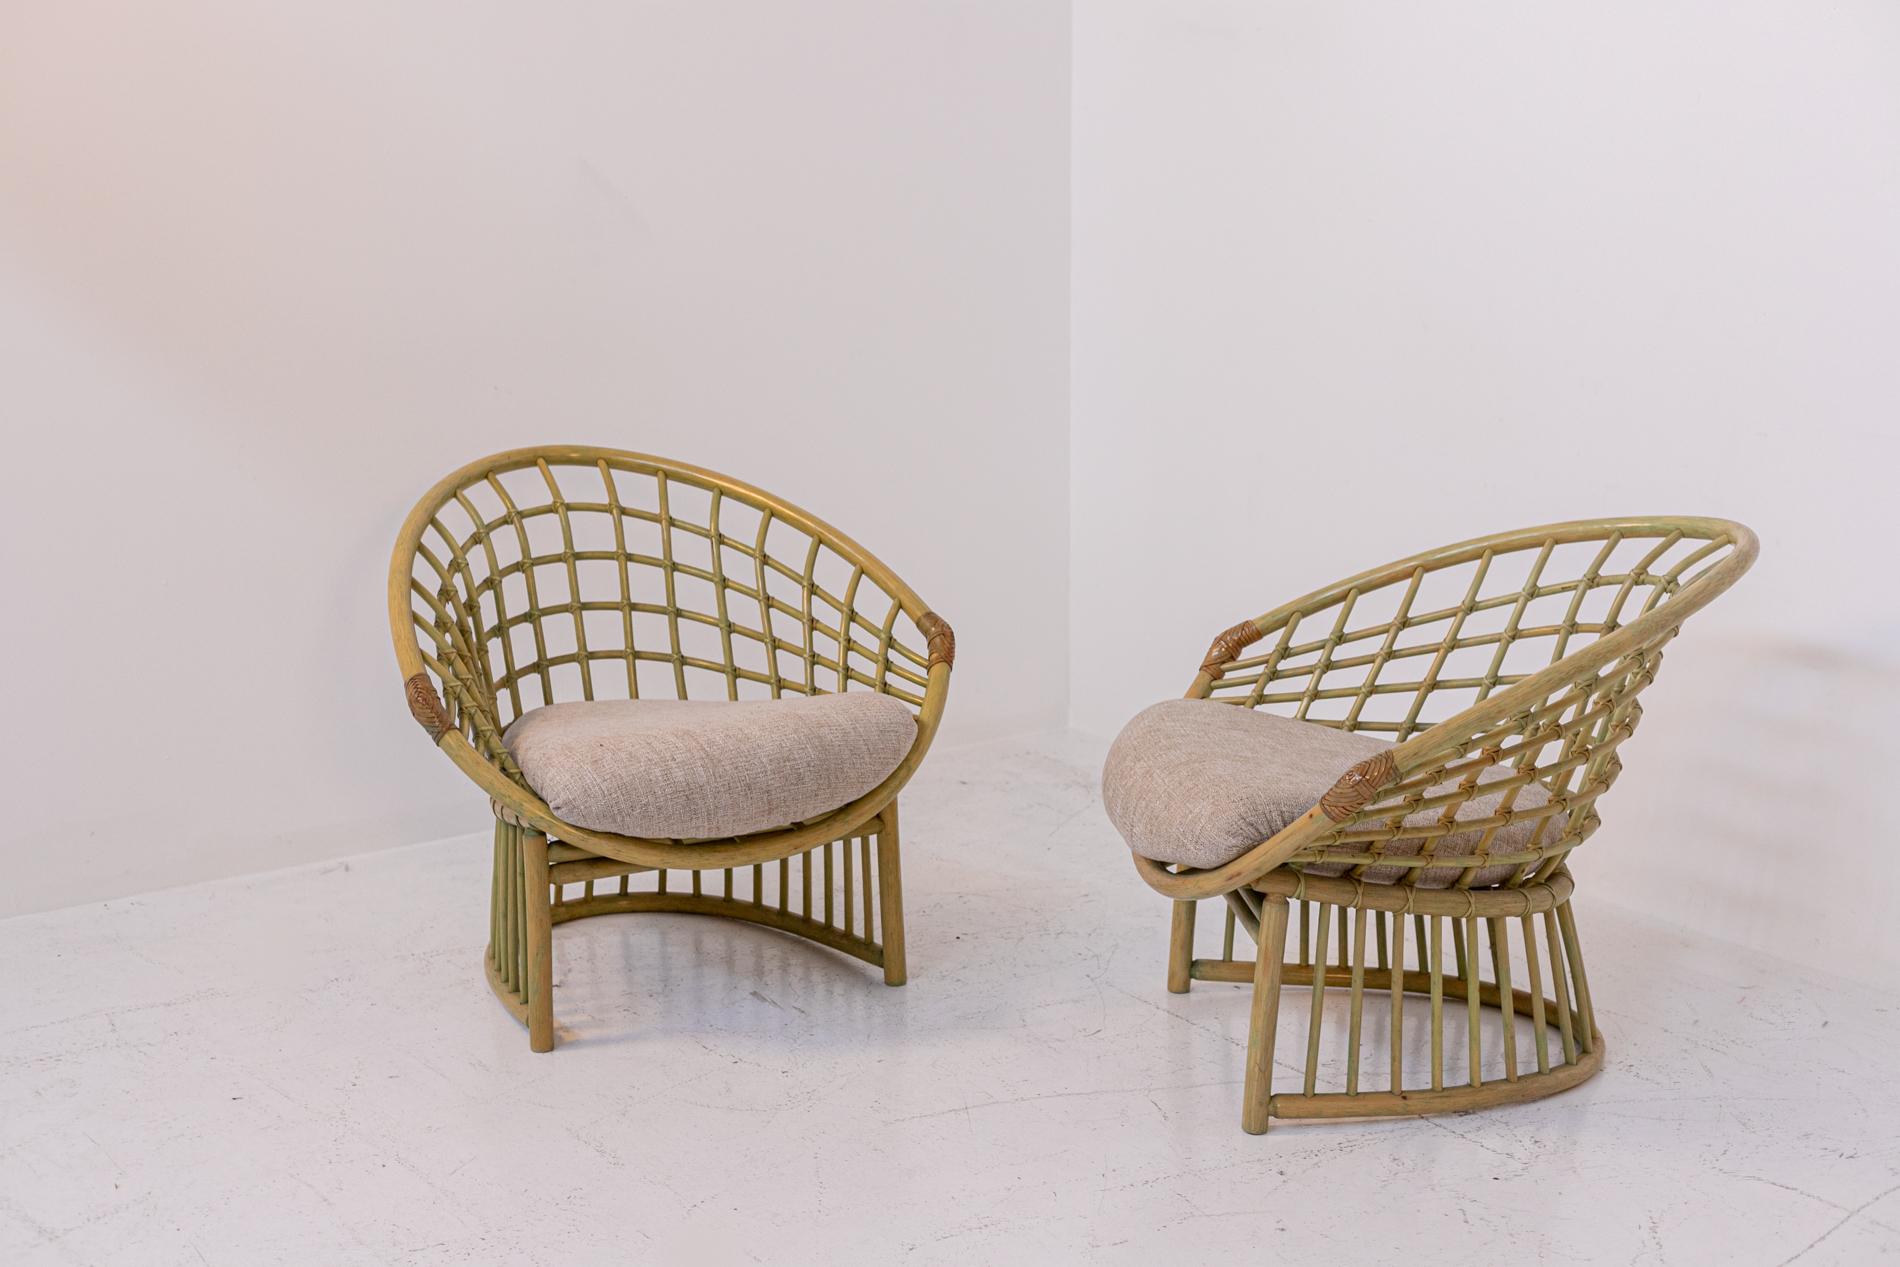 Beautiful pair of Italian bamboo armchairs from the 1980s. The armchairs are made from bamboo and rattan reeds. Their enveloping but also angular shape seems to resemble a diamond because of the interplay of weaves created by the bamboo. The base of